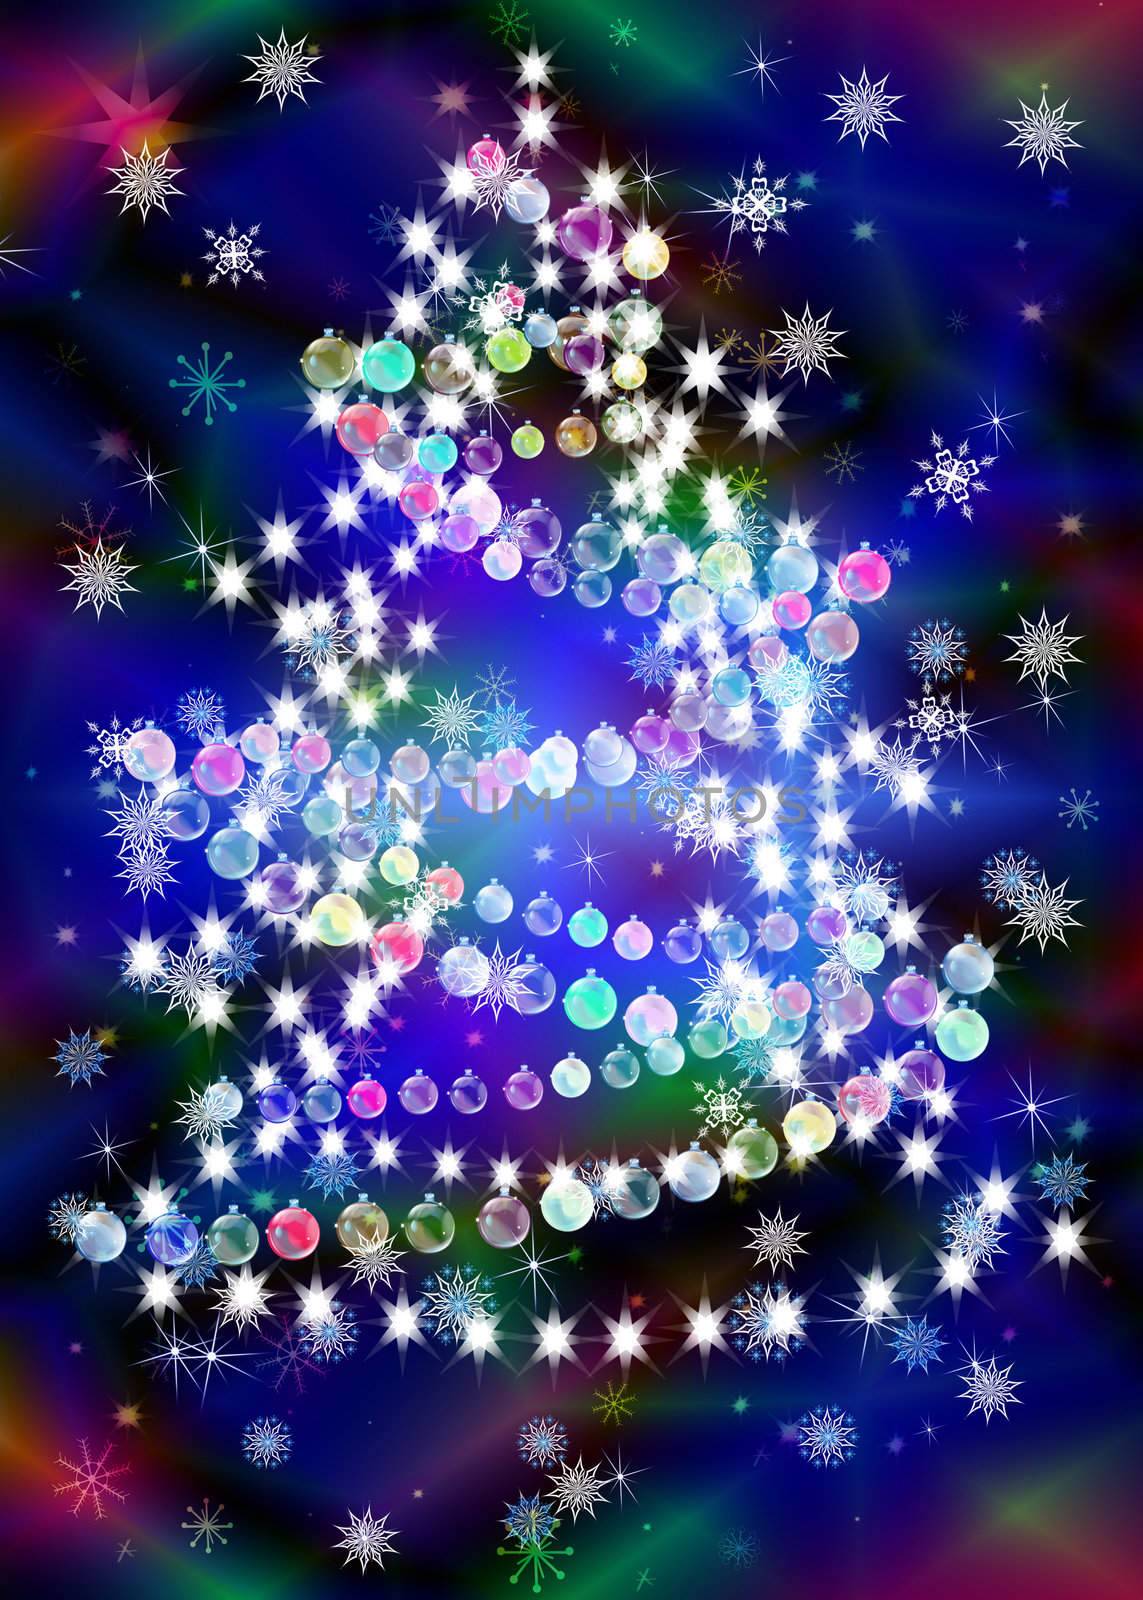 New Year's celebratory fur-tree with a garland on a bright abstract background